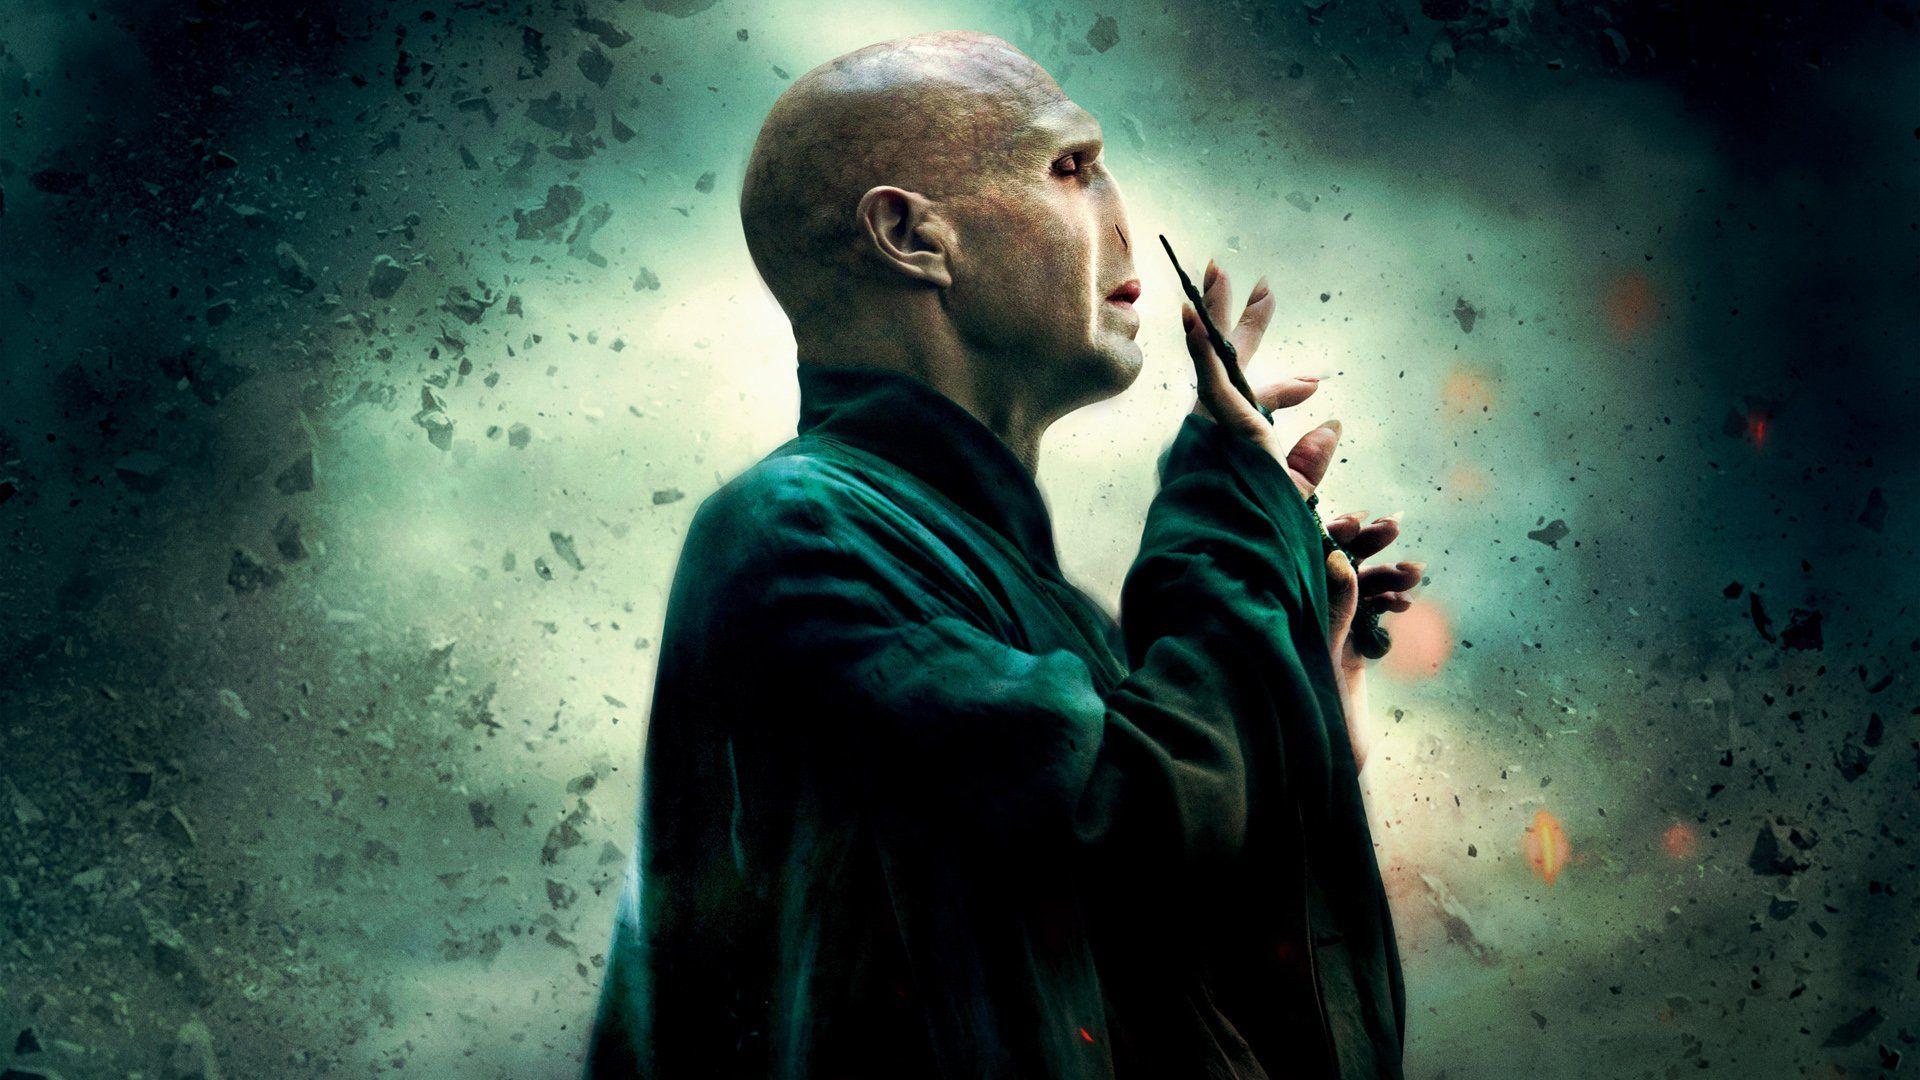 Lord Voldemort – Harry Potter